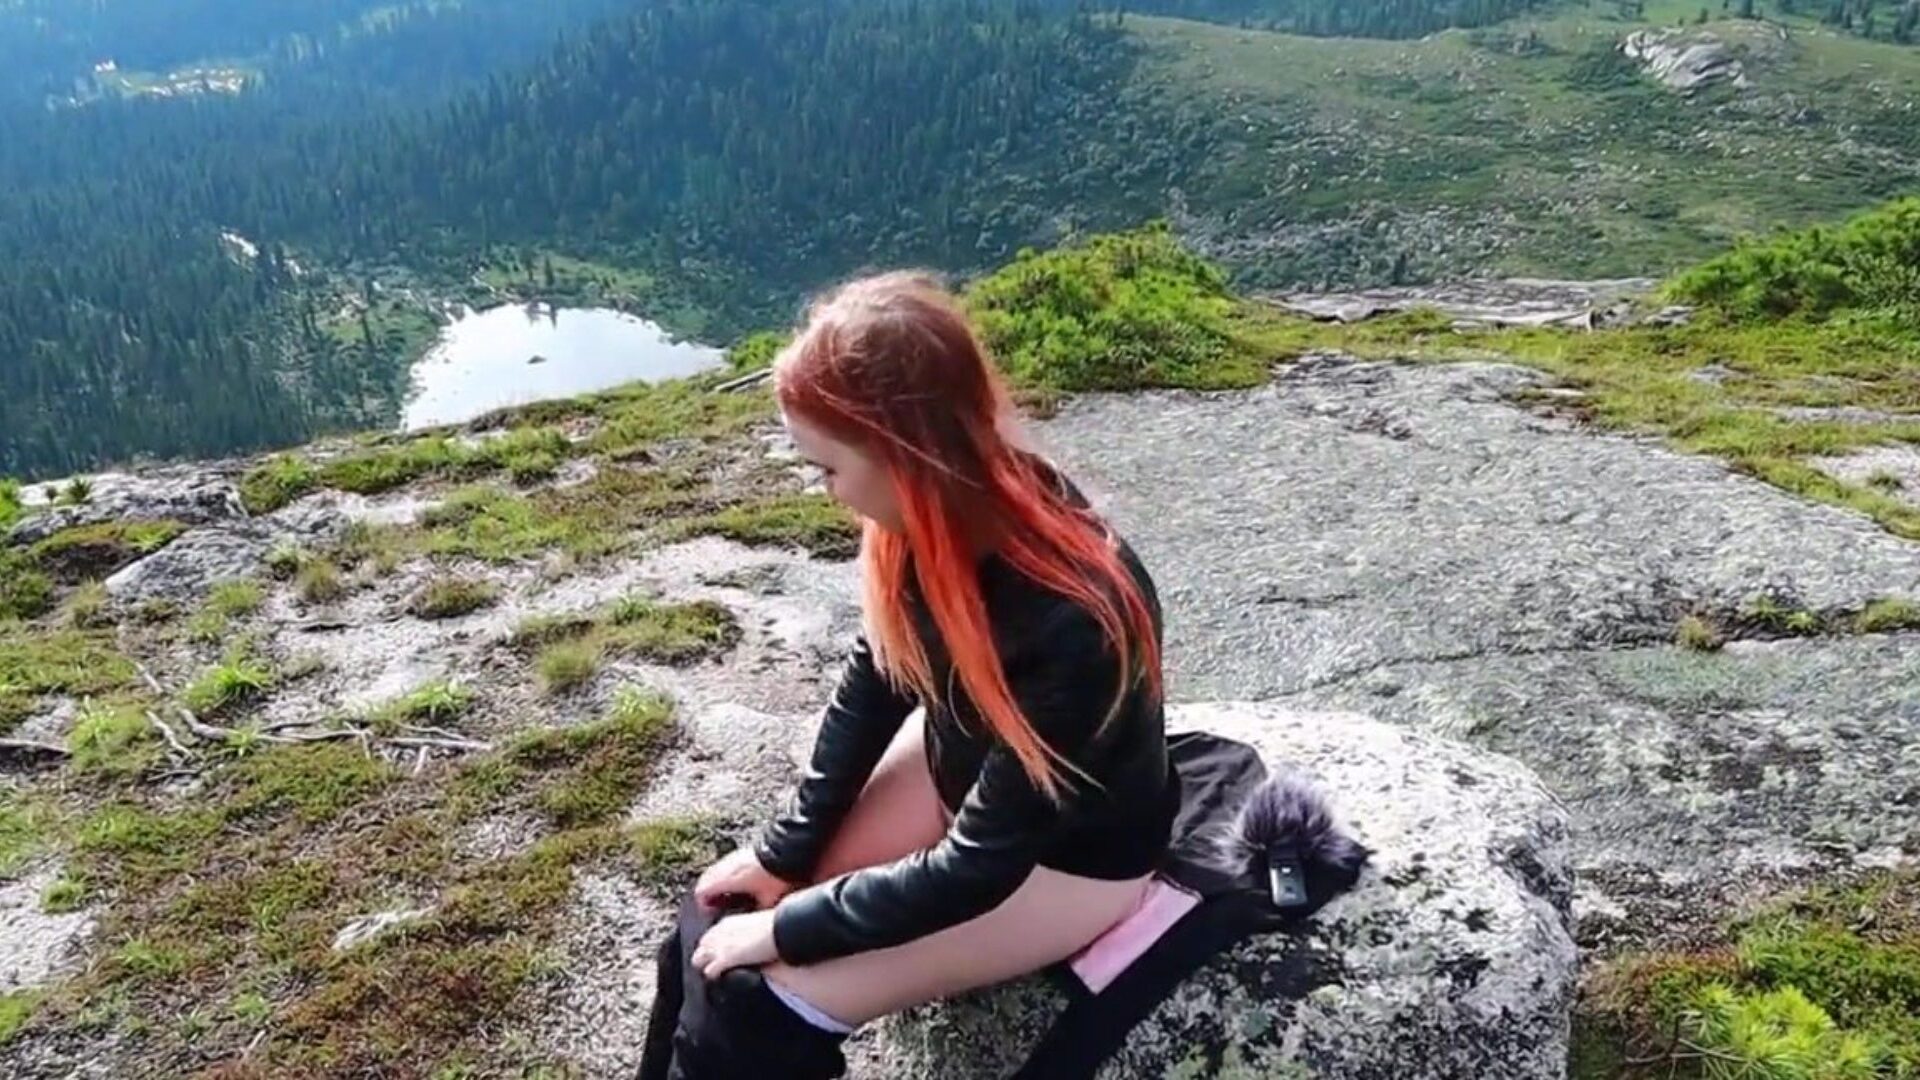 Girl Decided to Relax, Masturbate her Pussy and acquire an Orgasm High in the Mountains!